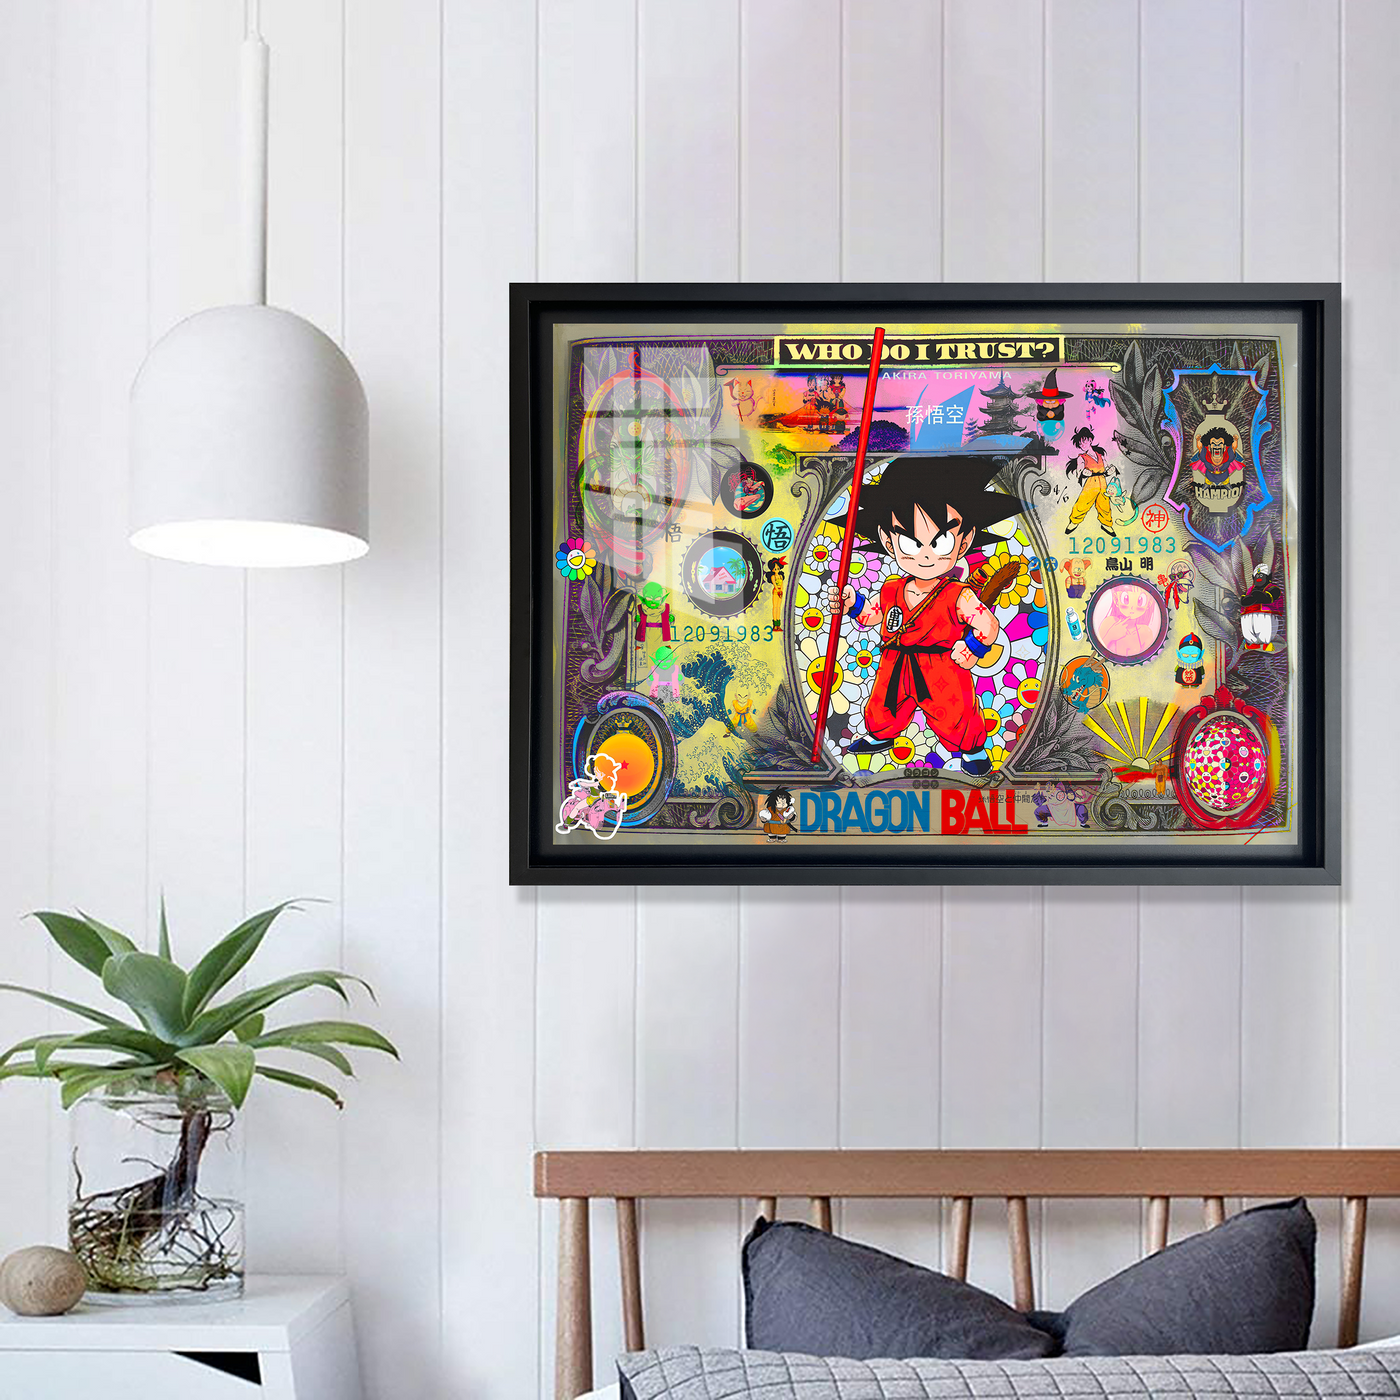 DRAGON BALL FOREVER - ARTWORK BY MR PABLO COSTA